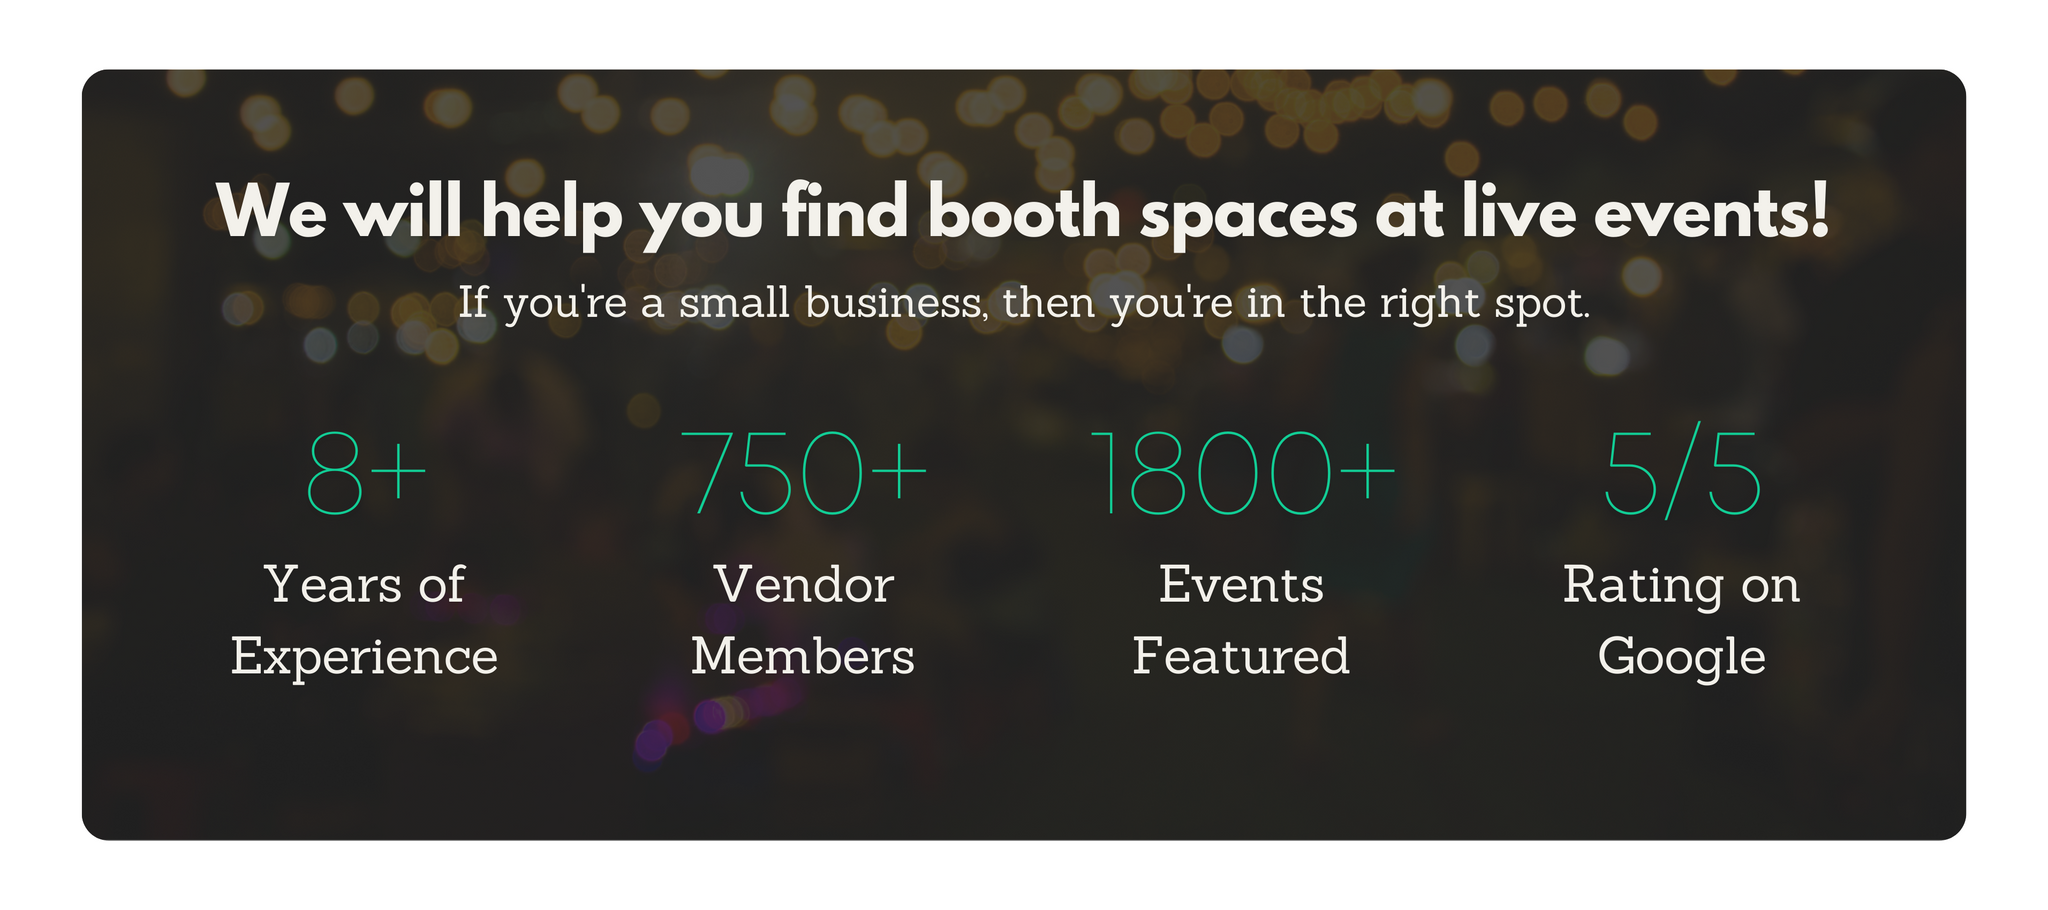 Vendor Bridge has over 8 years of experience in the event industry dealing with all types of markets, trade shows, festivals and night markets in Calgary and Edmonton.